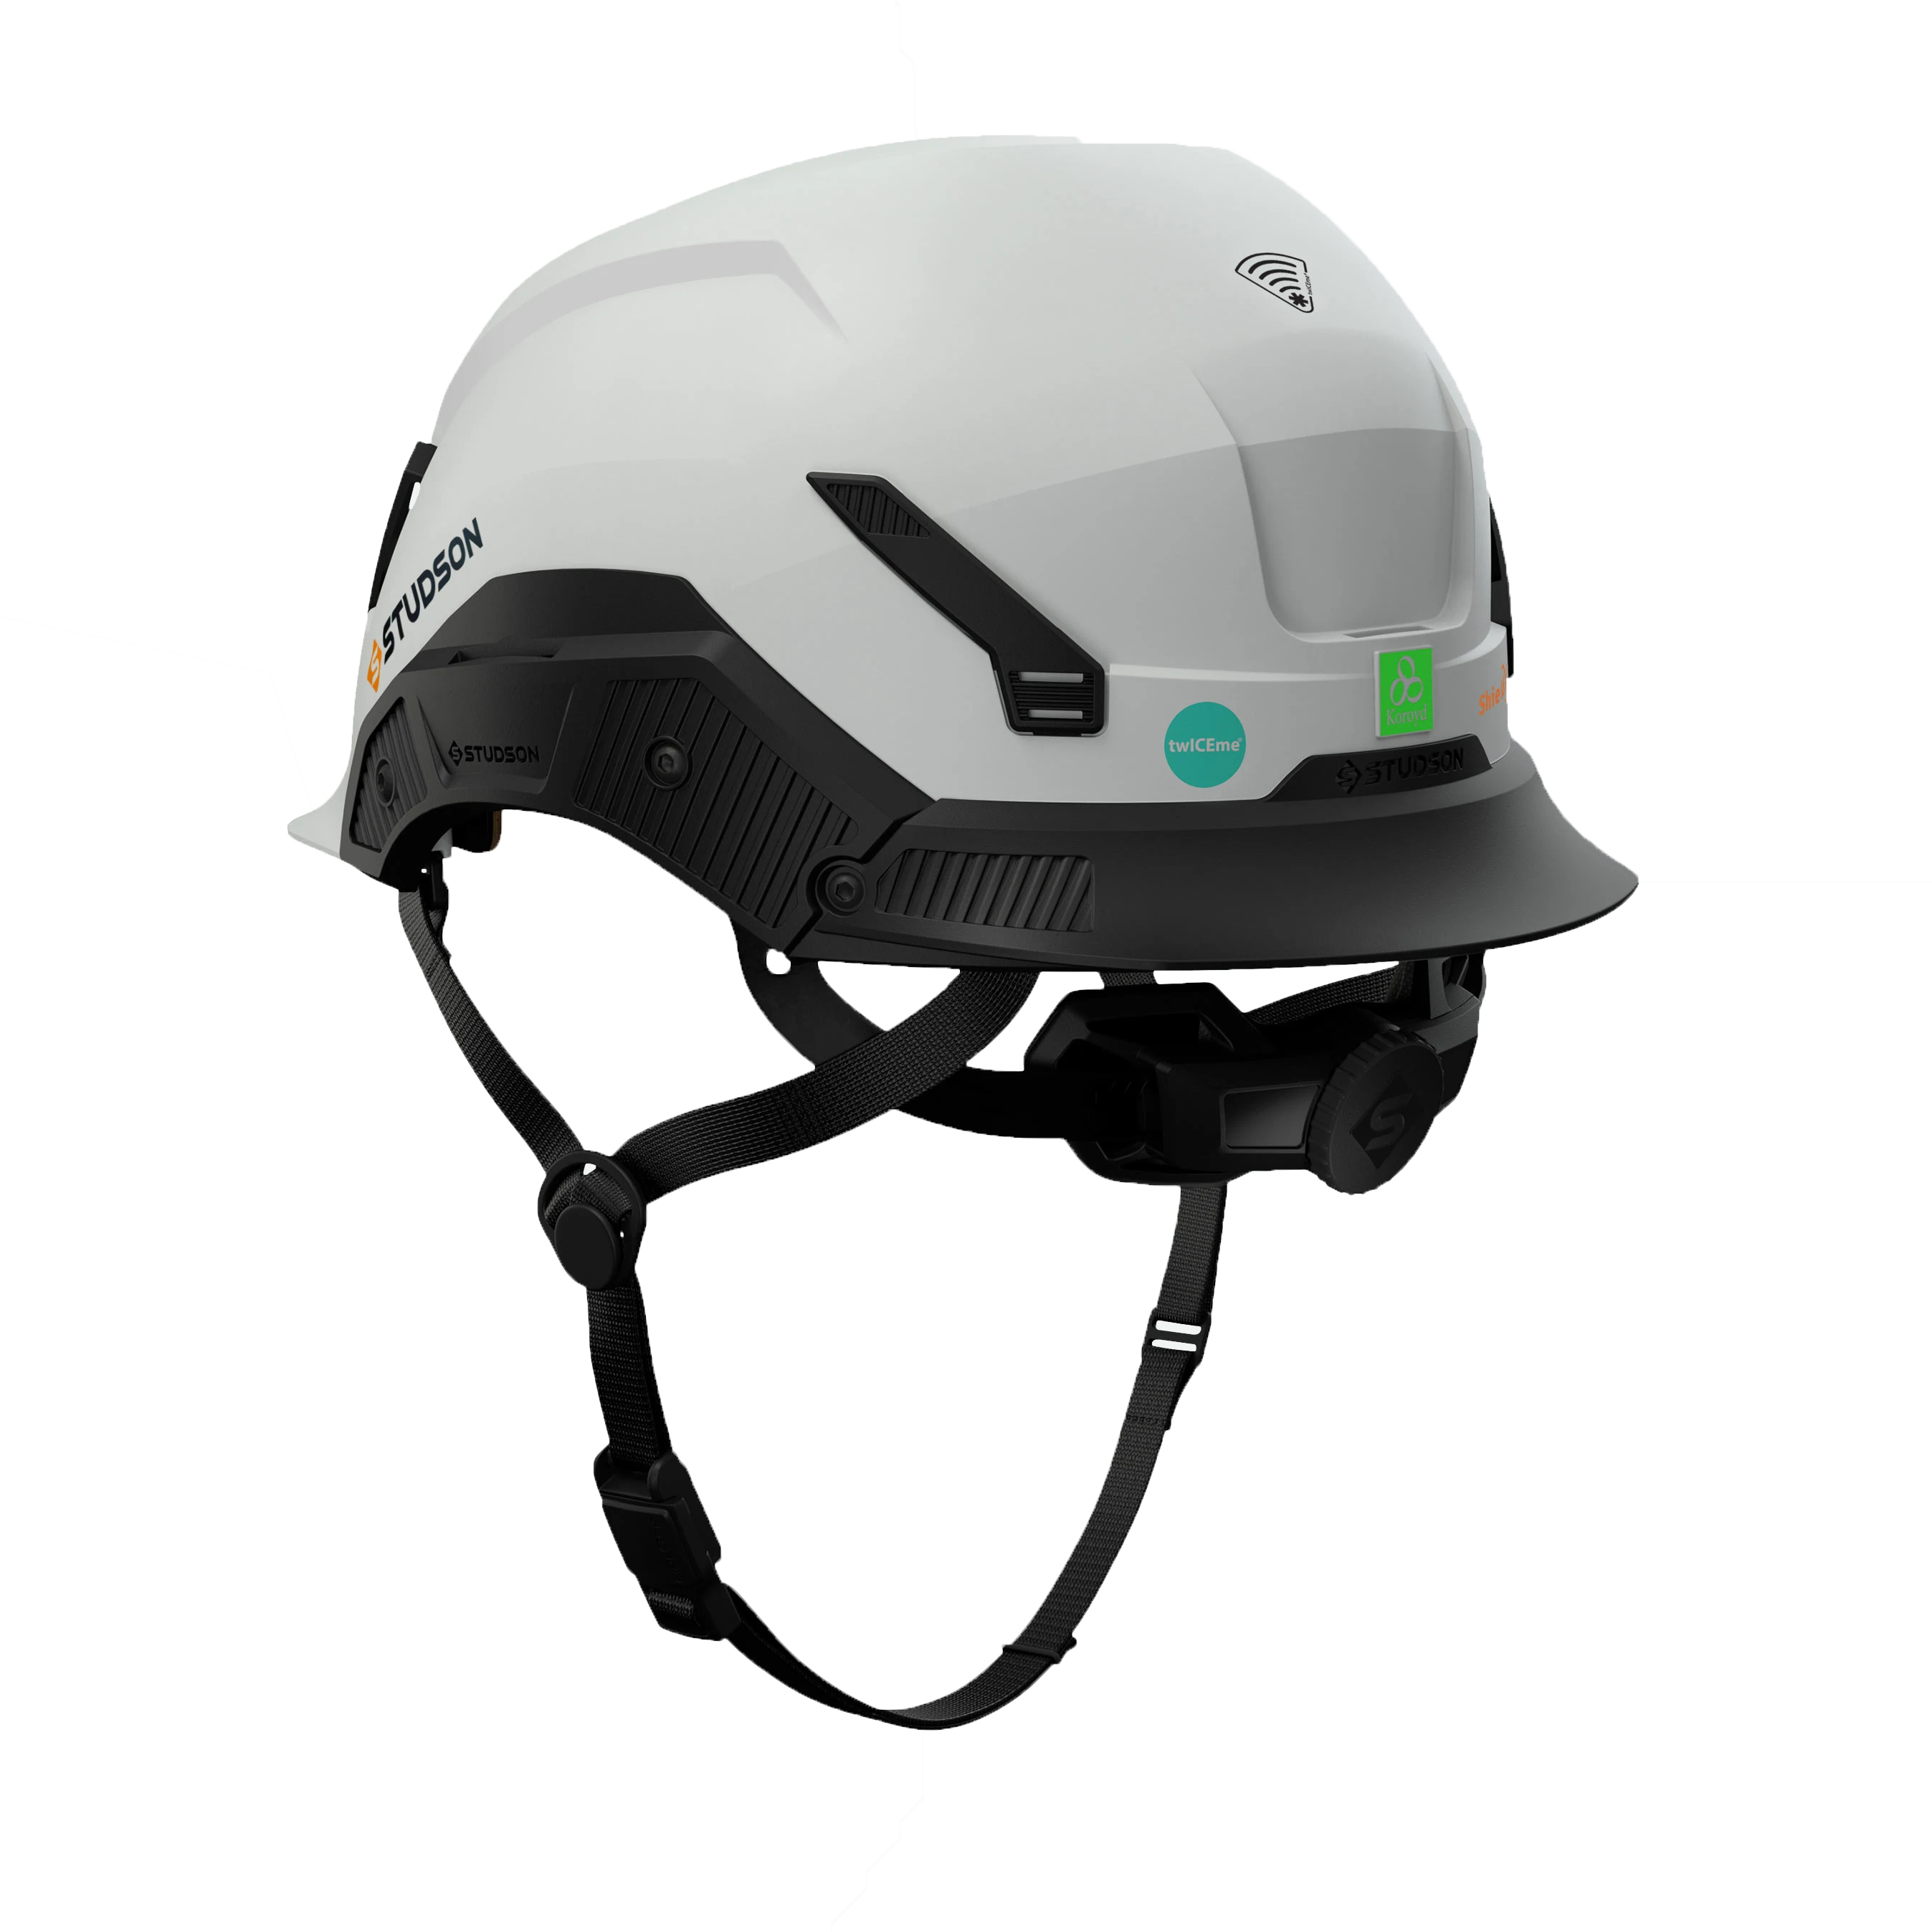 Studson SHK-1 Type 2 Non-Vented Helmet from GME Supply